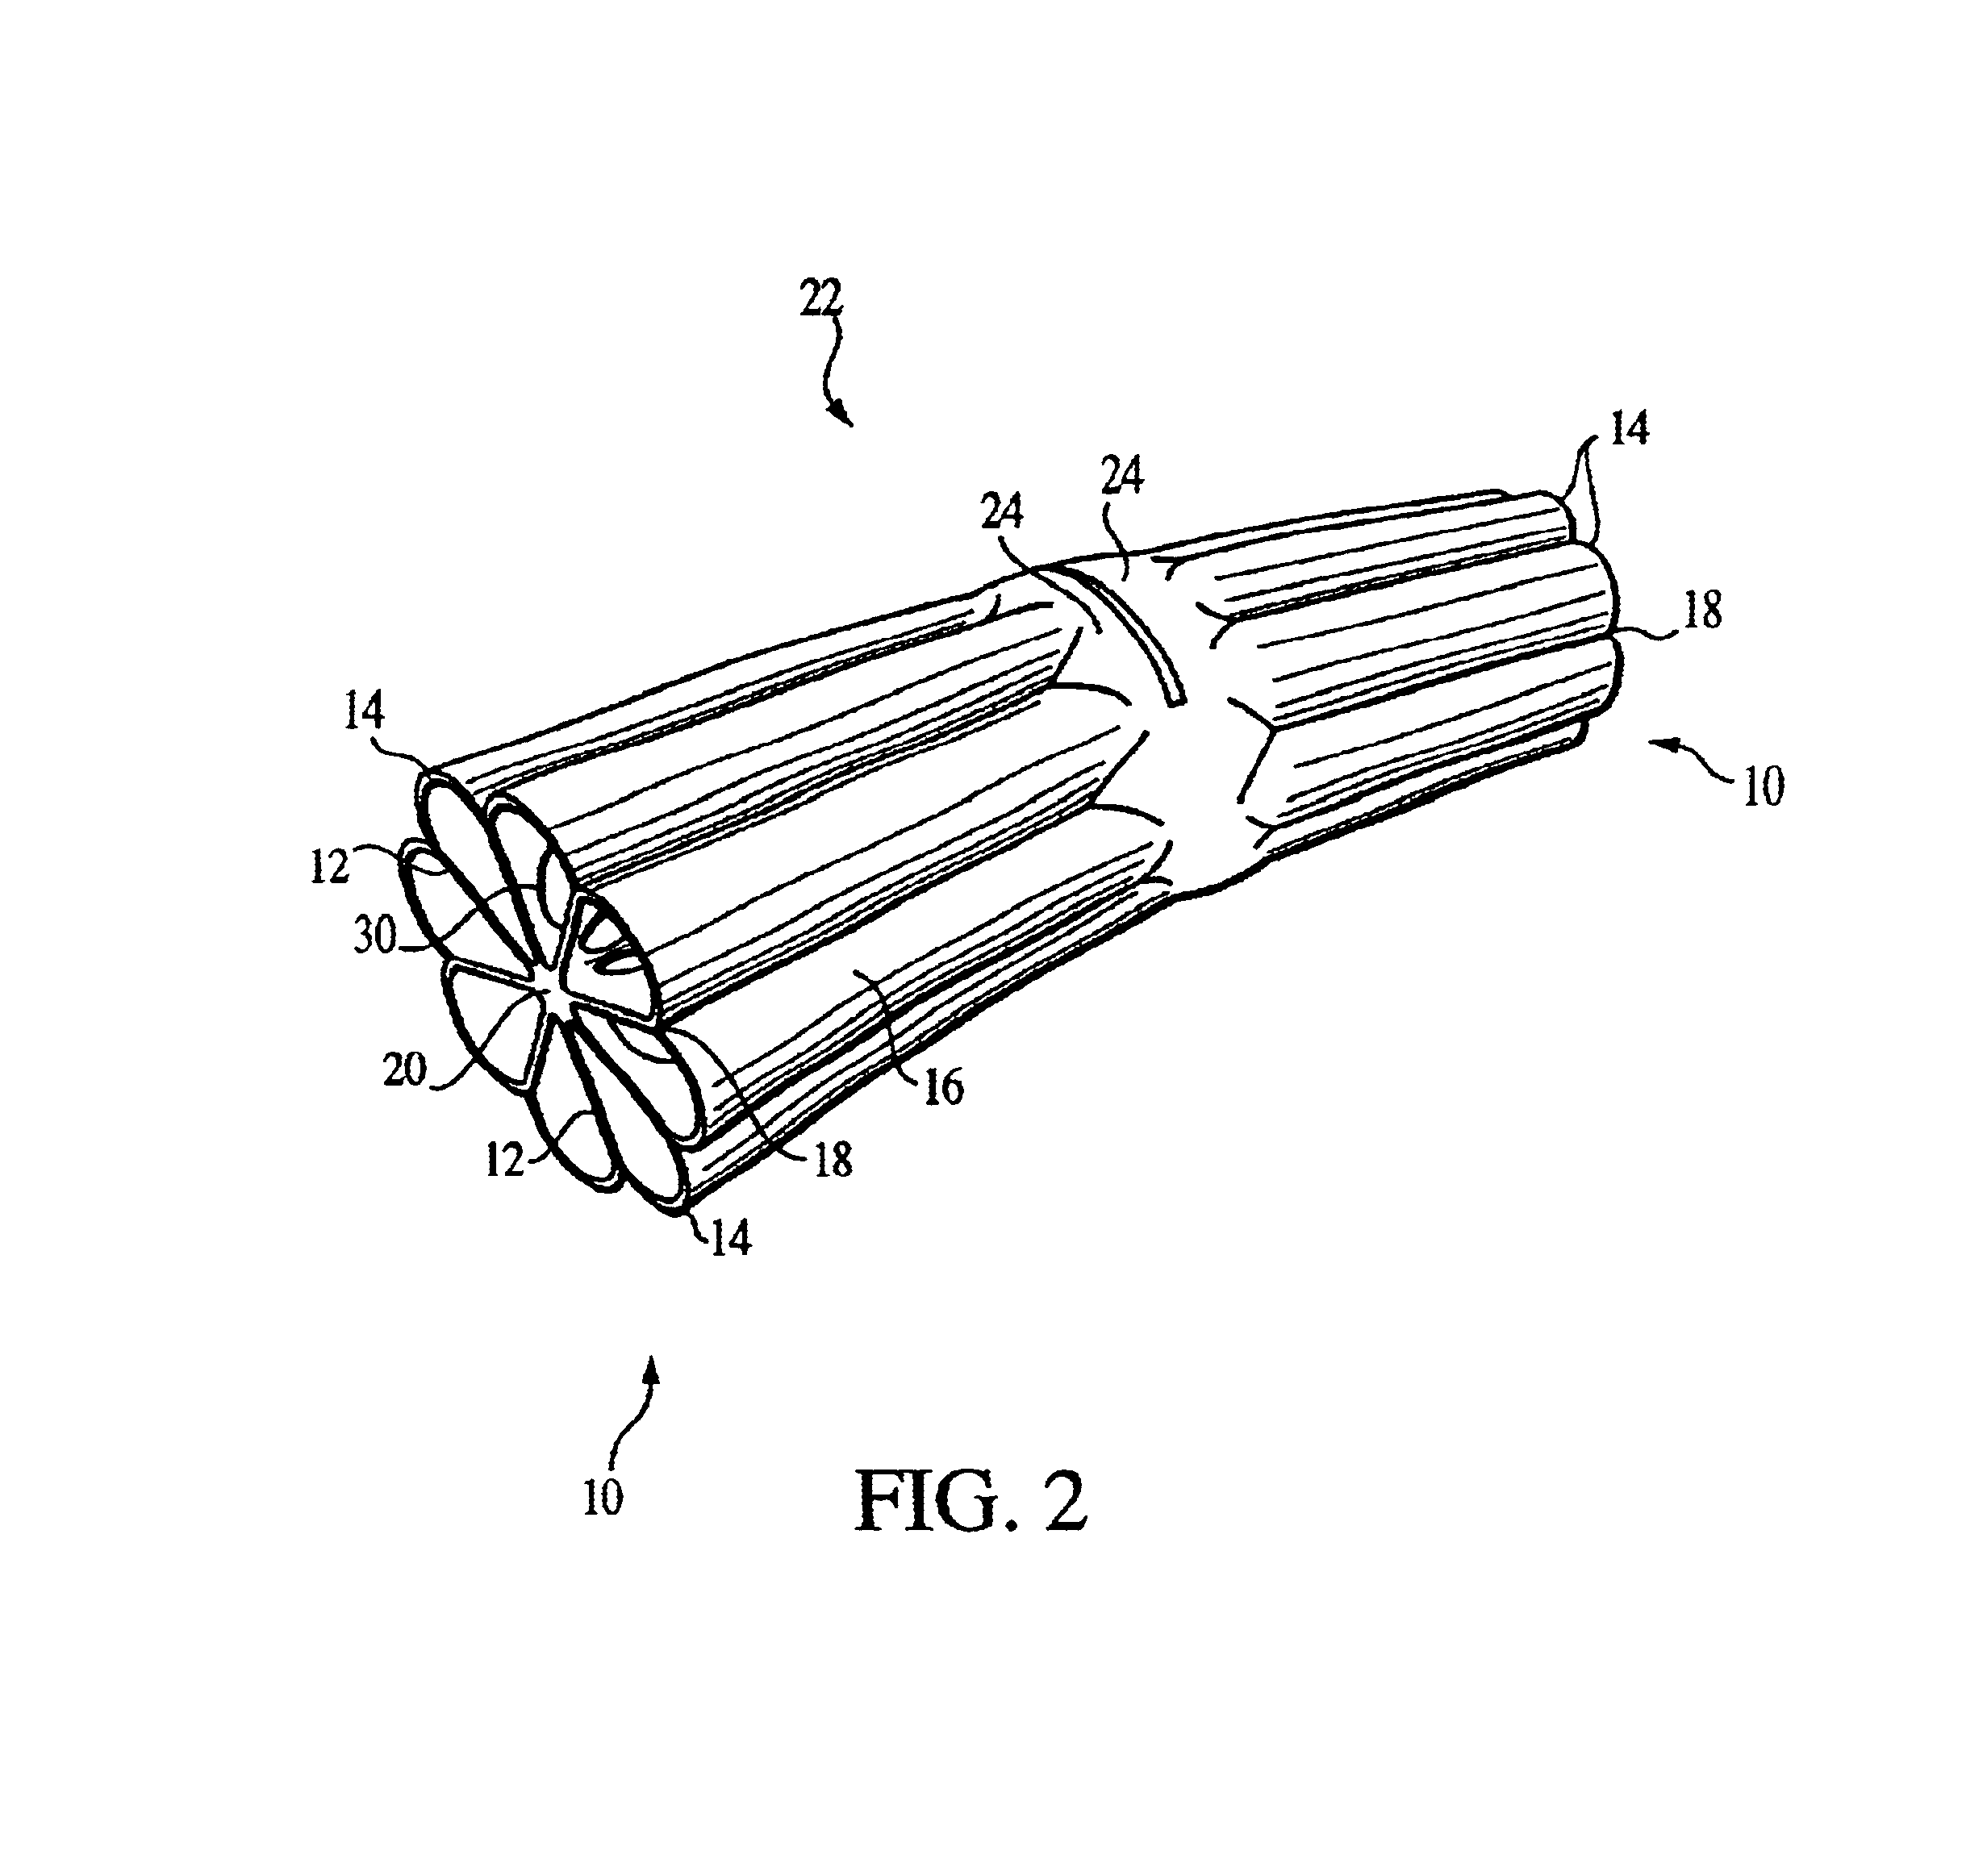 Unitary metal structural member with internal reinforcement